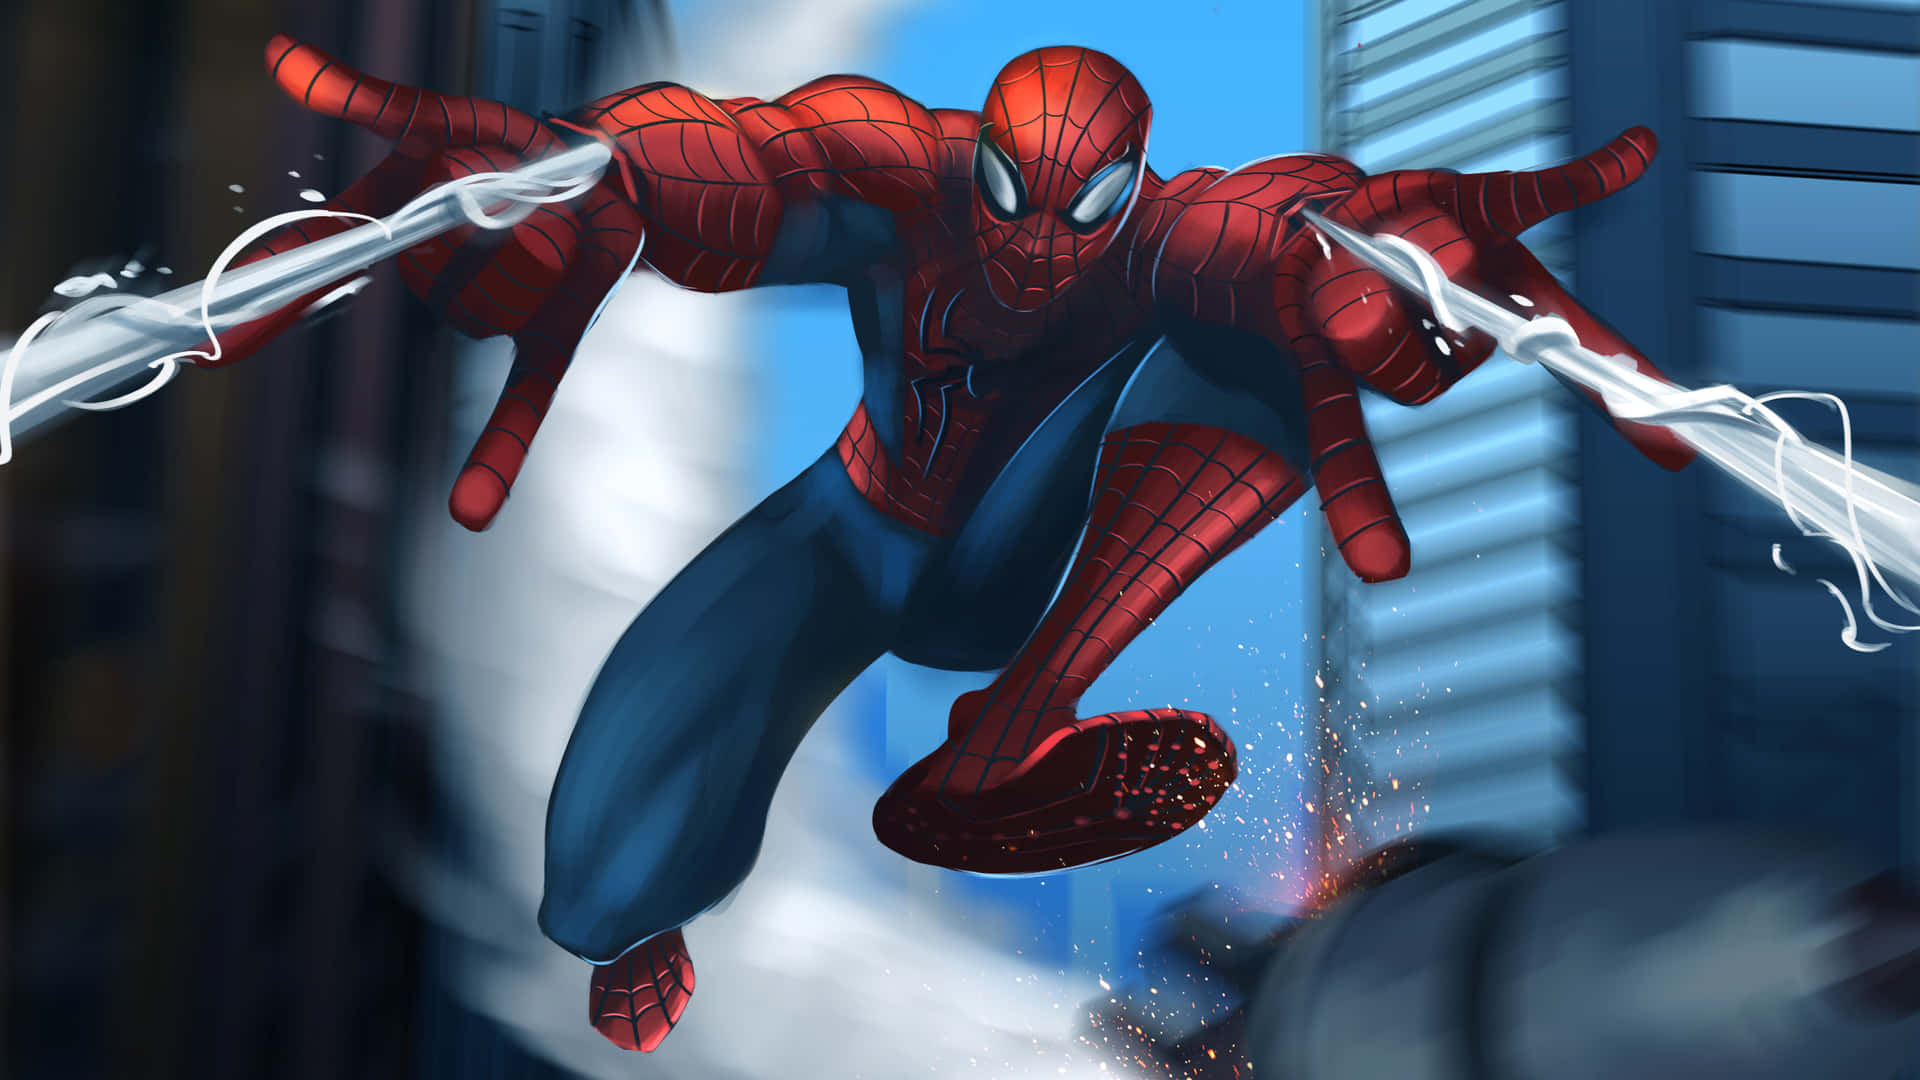 Spider-Man Showcasing his Iconic Web Shooter Wallpaper